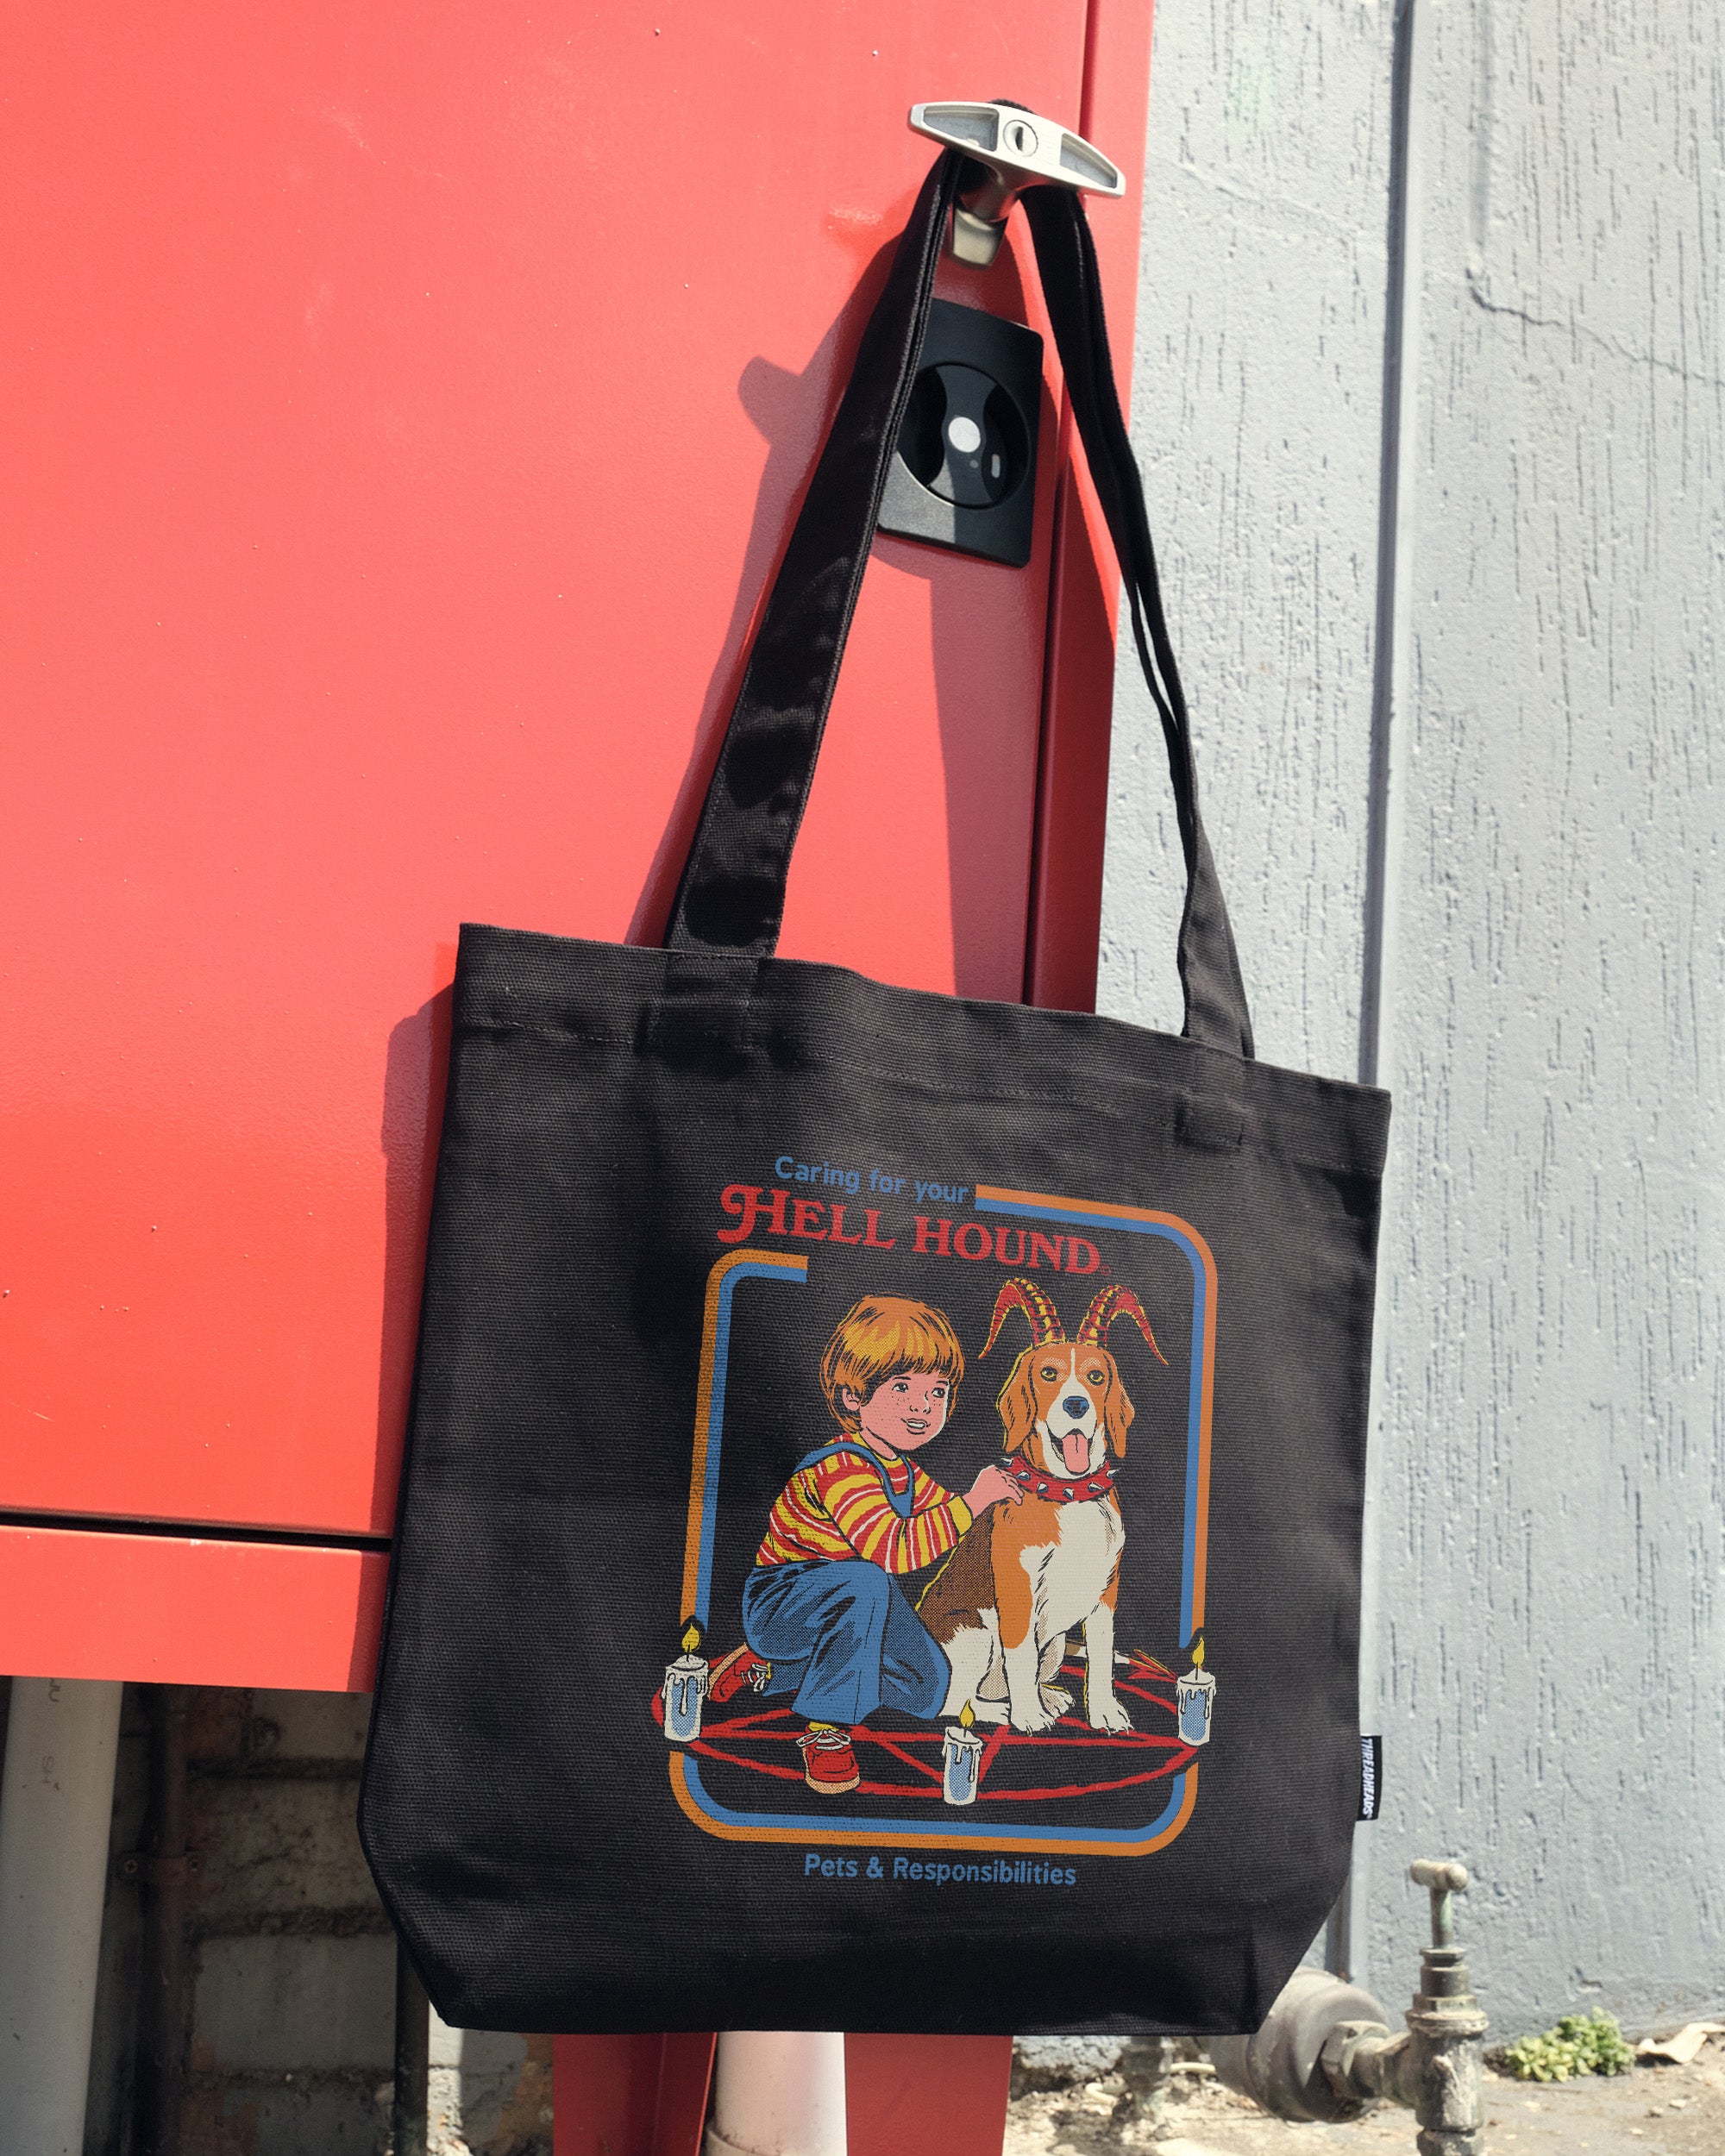 Caring For Your Hell Hound Tote Bag